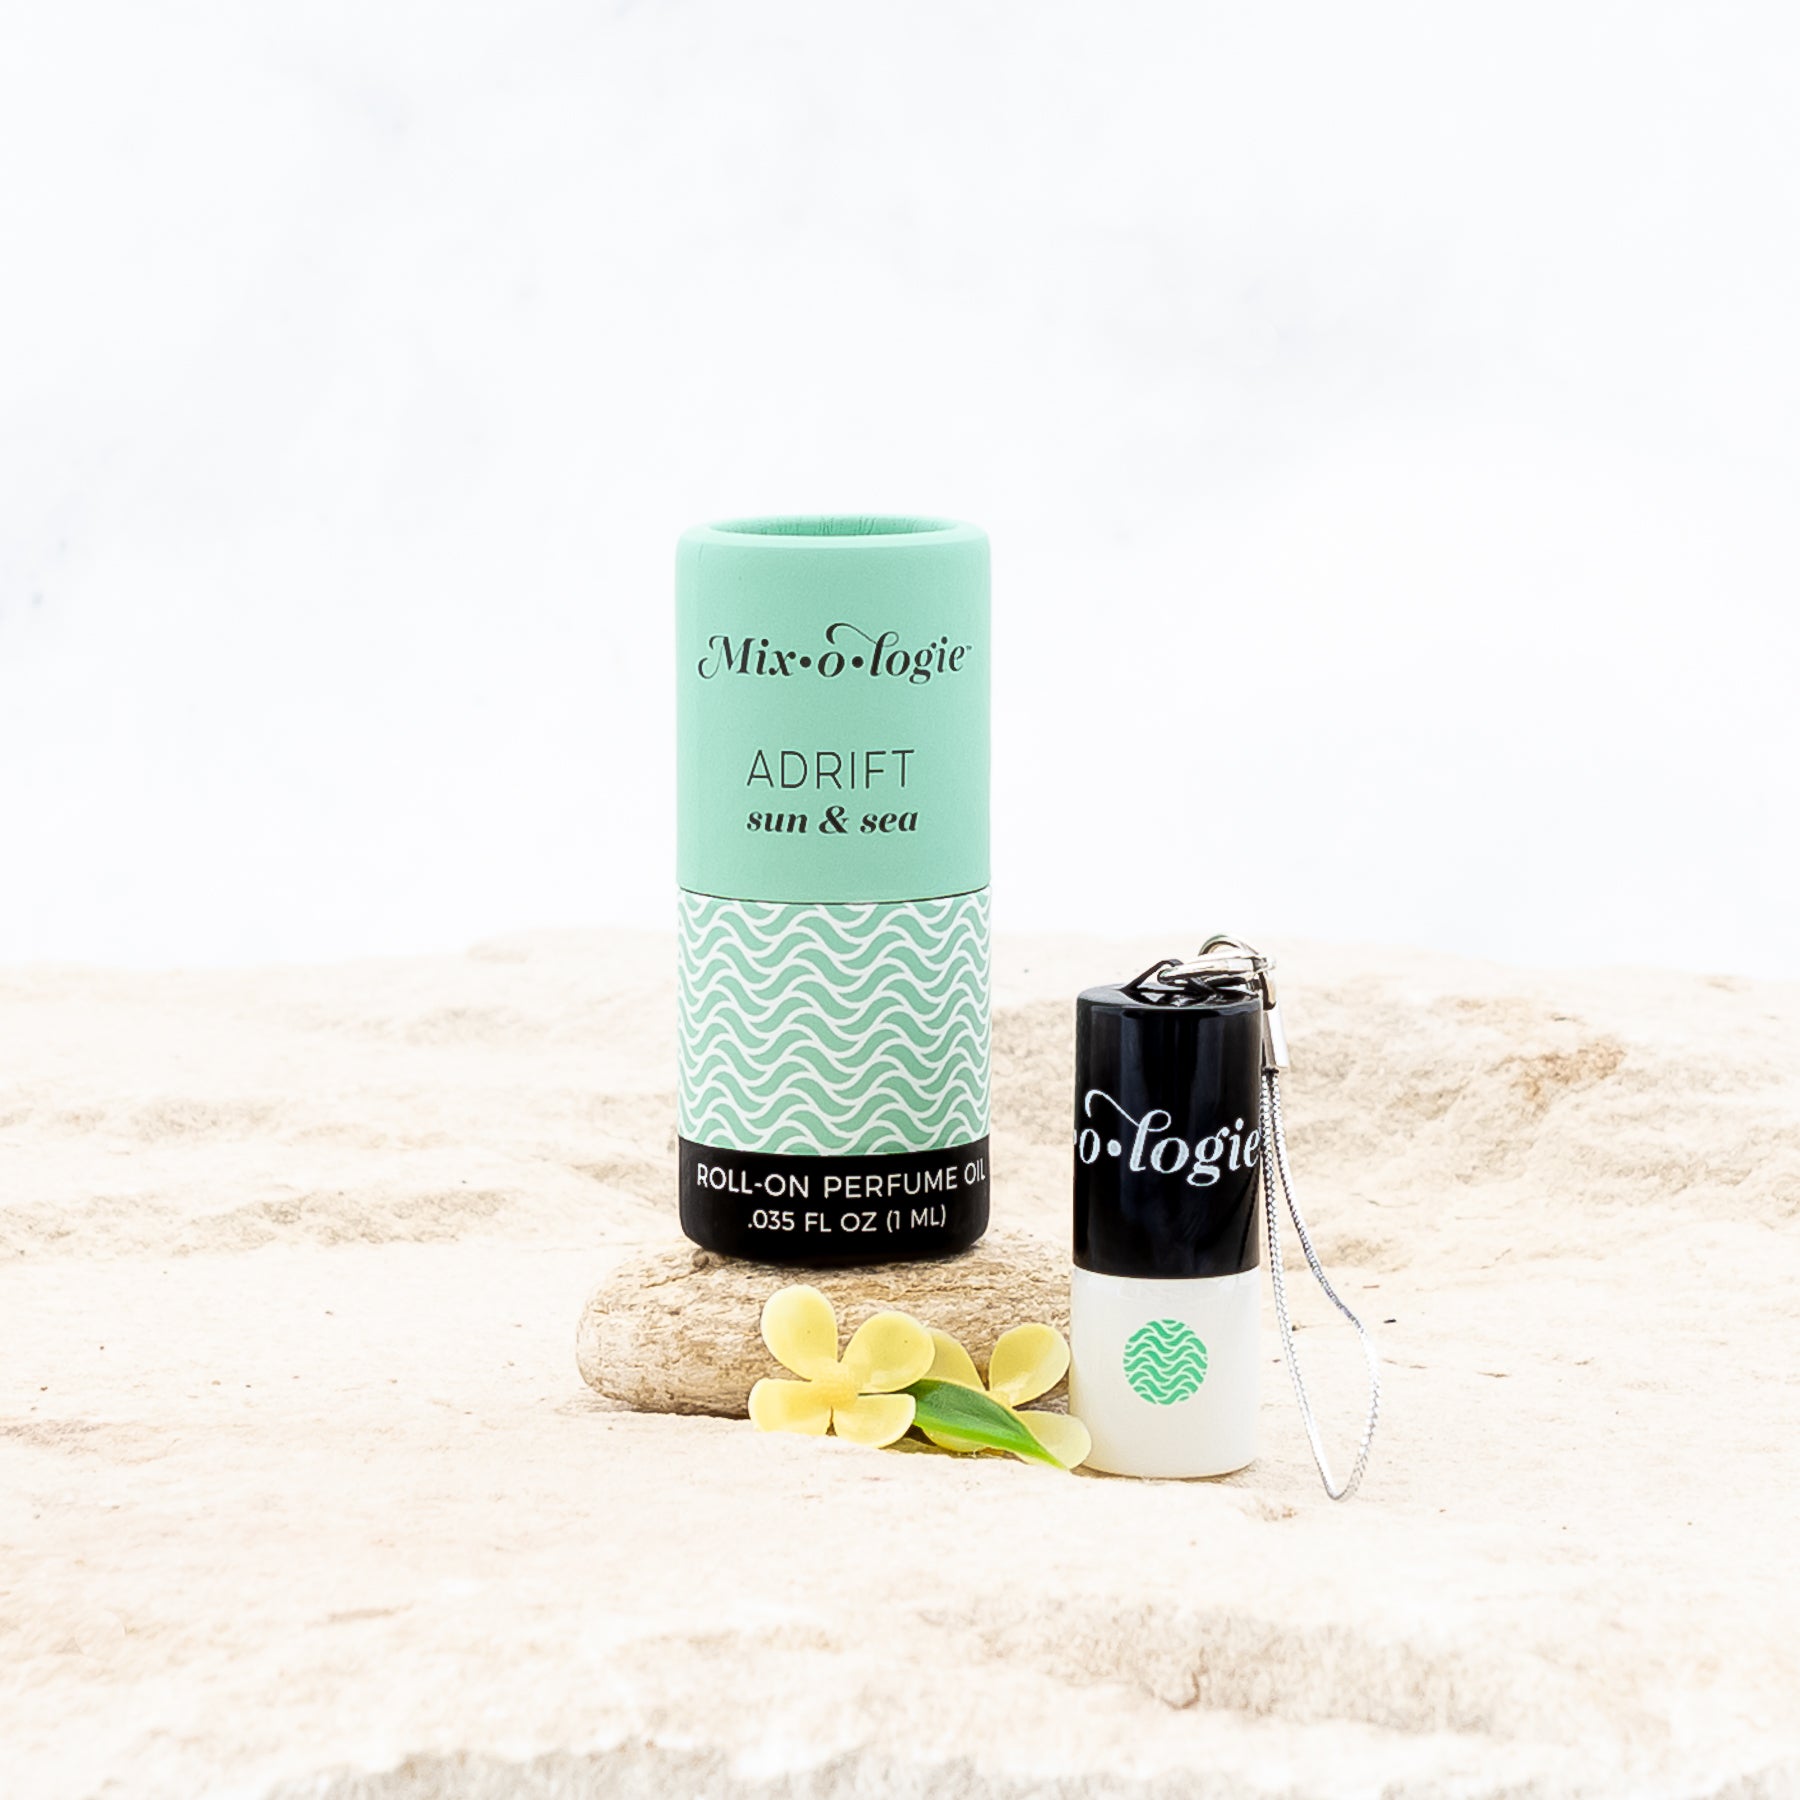 Adrift (Sun & Sea) mini white cylinder rollerballs with black top and keychain attachment with light green Adrift pattern has .035 fl oz or 1 mL. Light green cylinder packing tube. Mini rollerball and cylinder tube are in sand on a rock with yellow flowers.